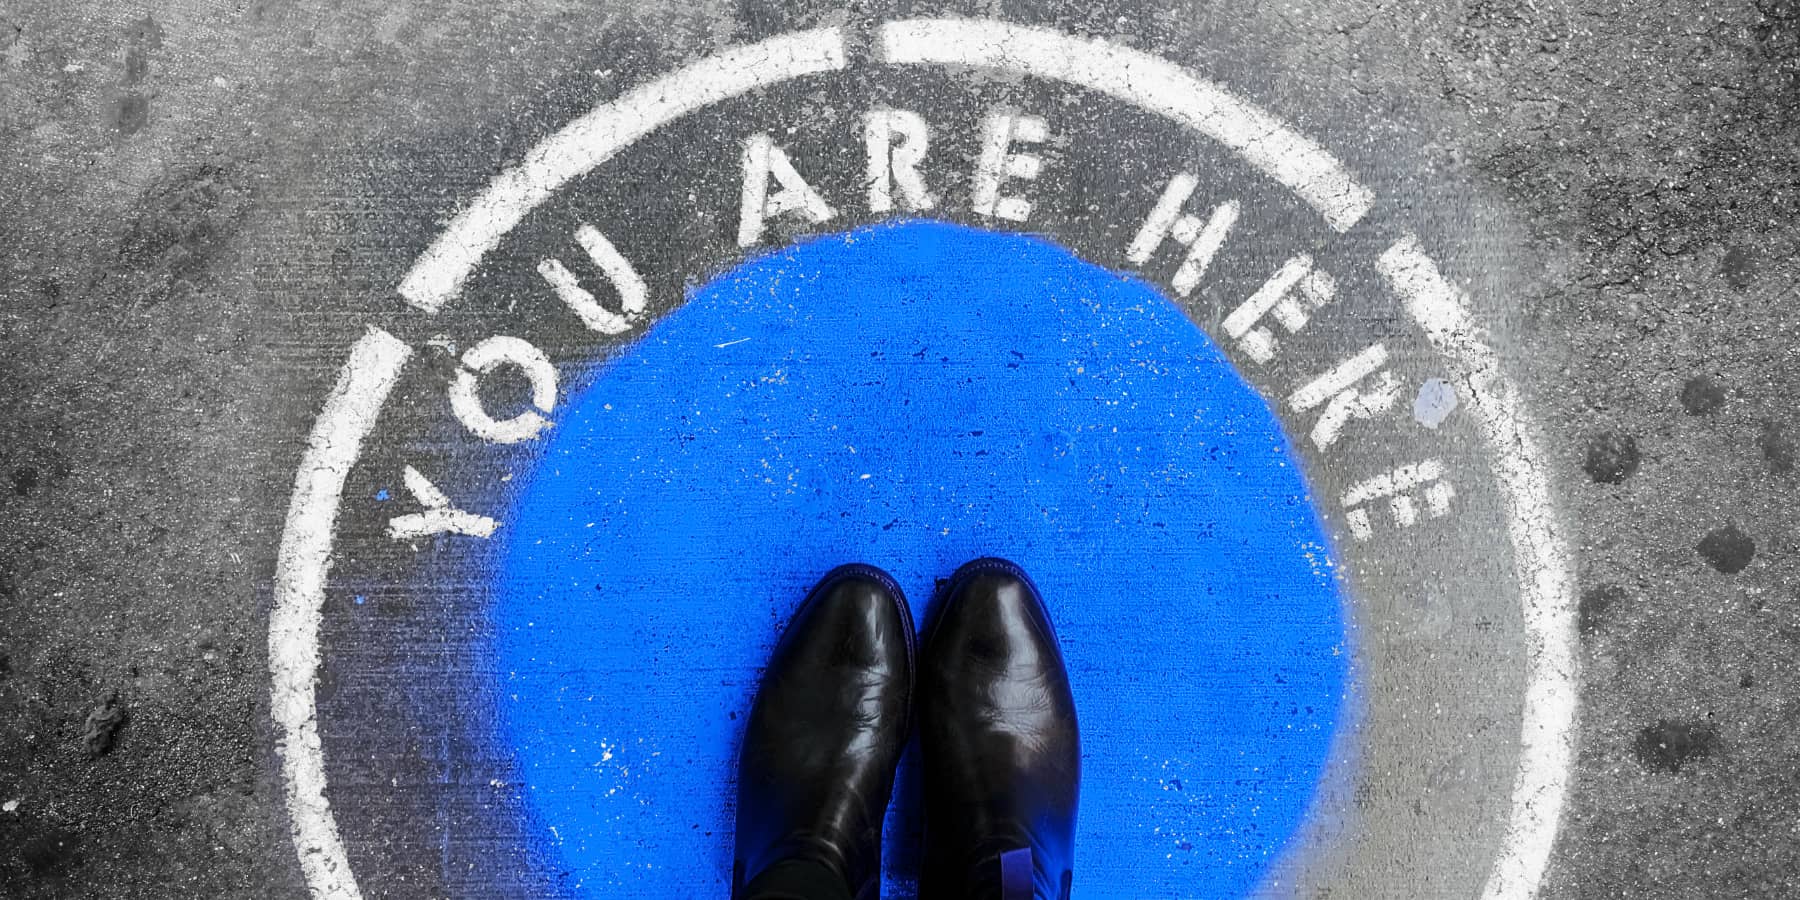 "You are here" stencil spray painted around a blue circle with shoes.